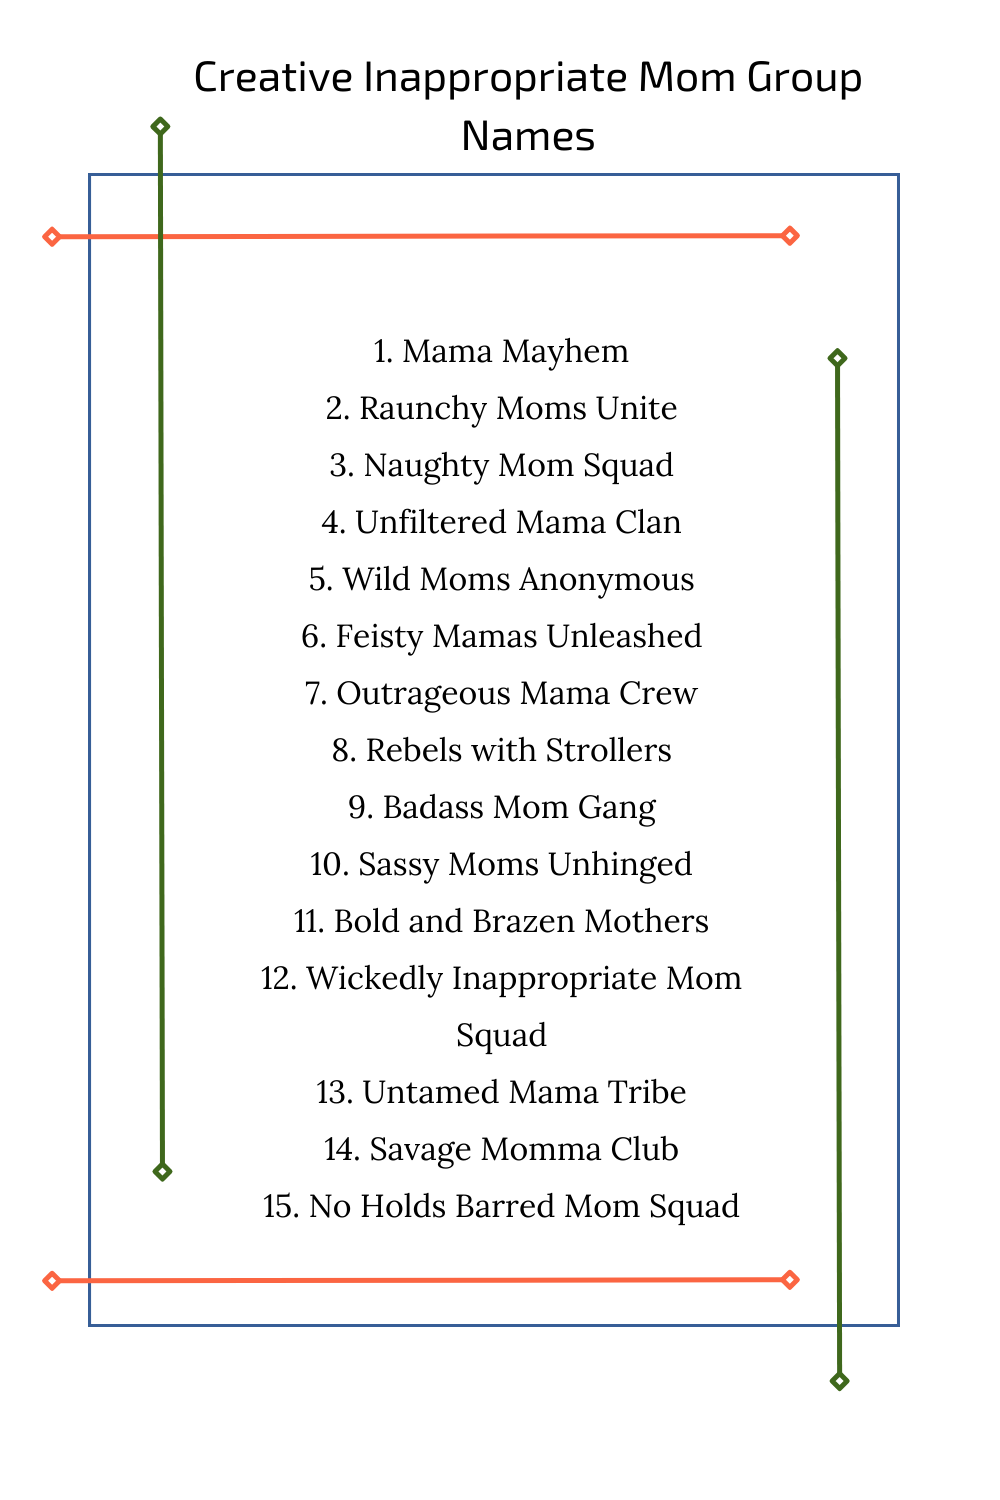 Creative Inappropriate Mom Group Names